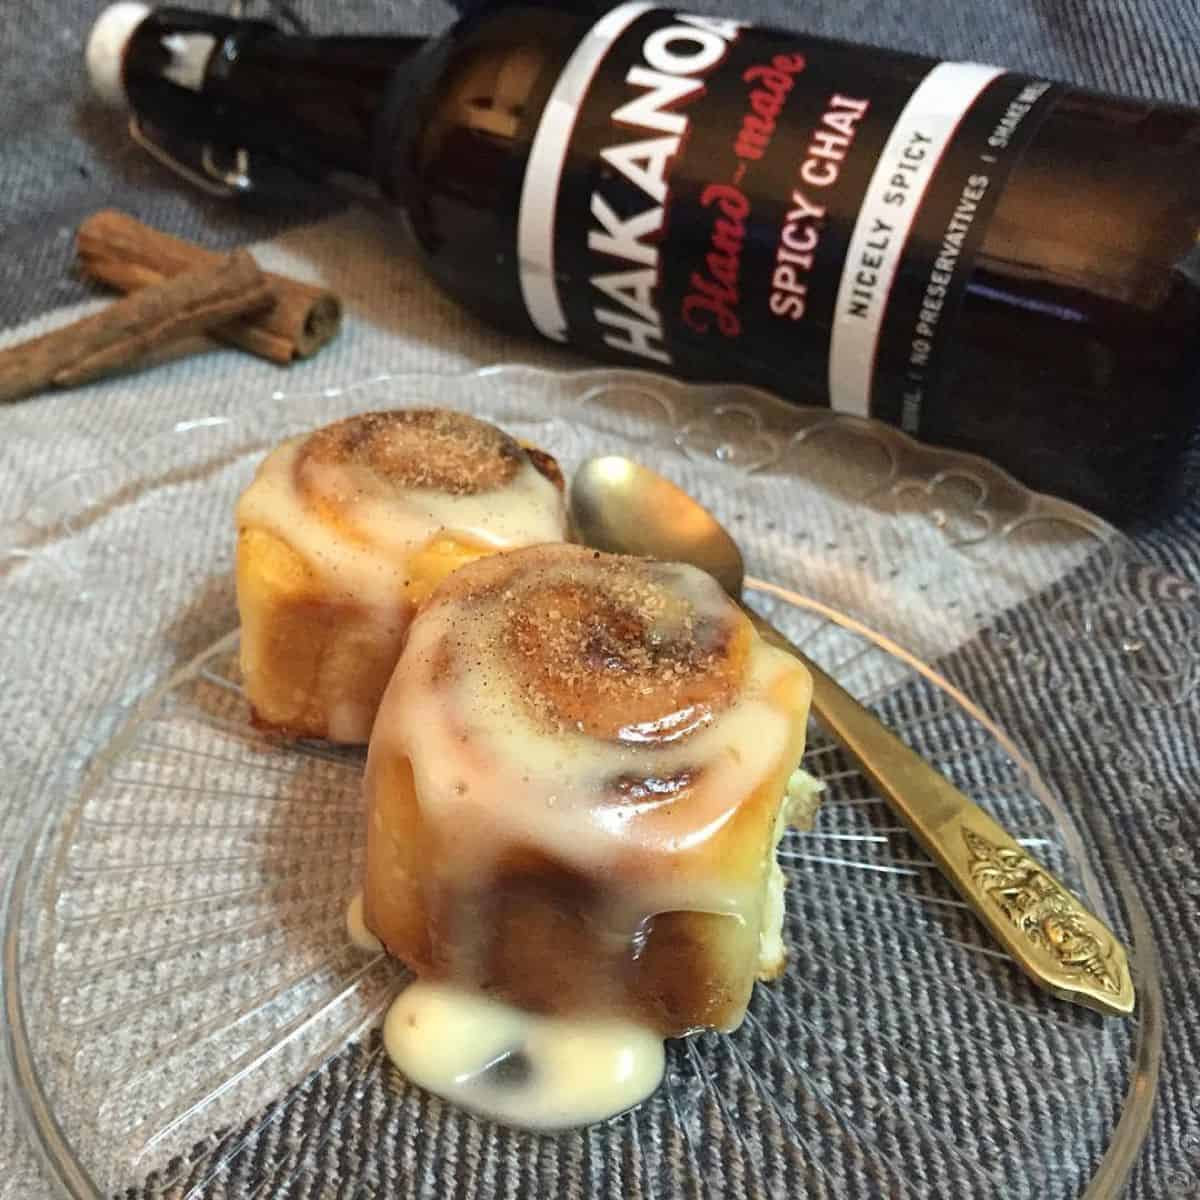 Cinnamon rolls glazed with chai syrup and a bottle of spicy chai in the background.